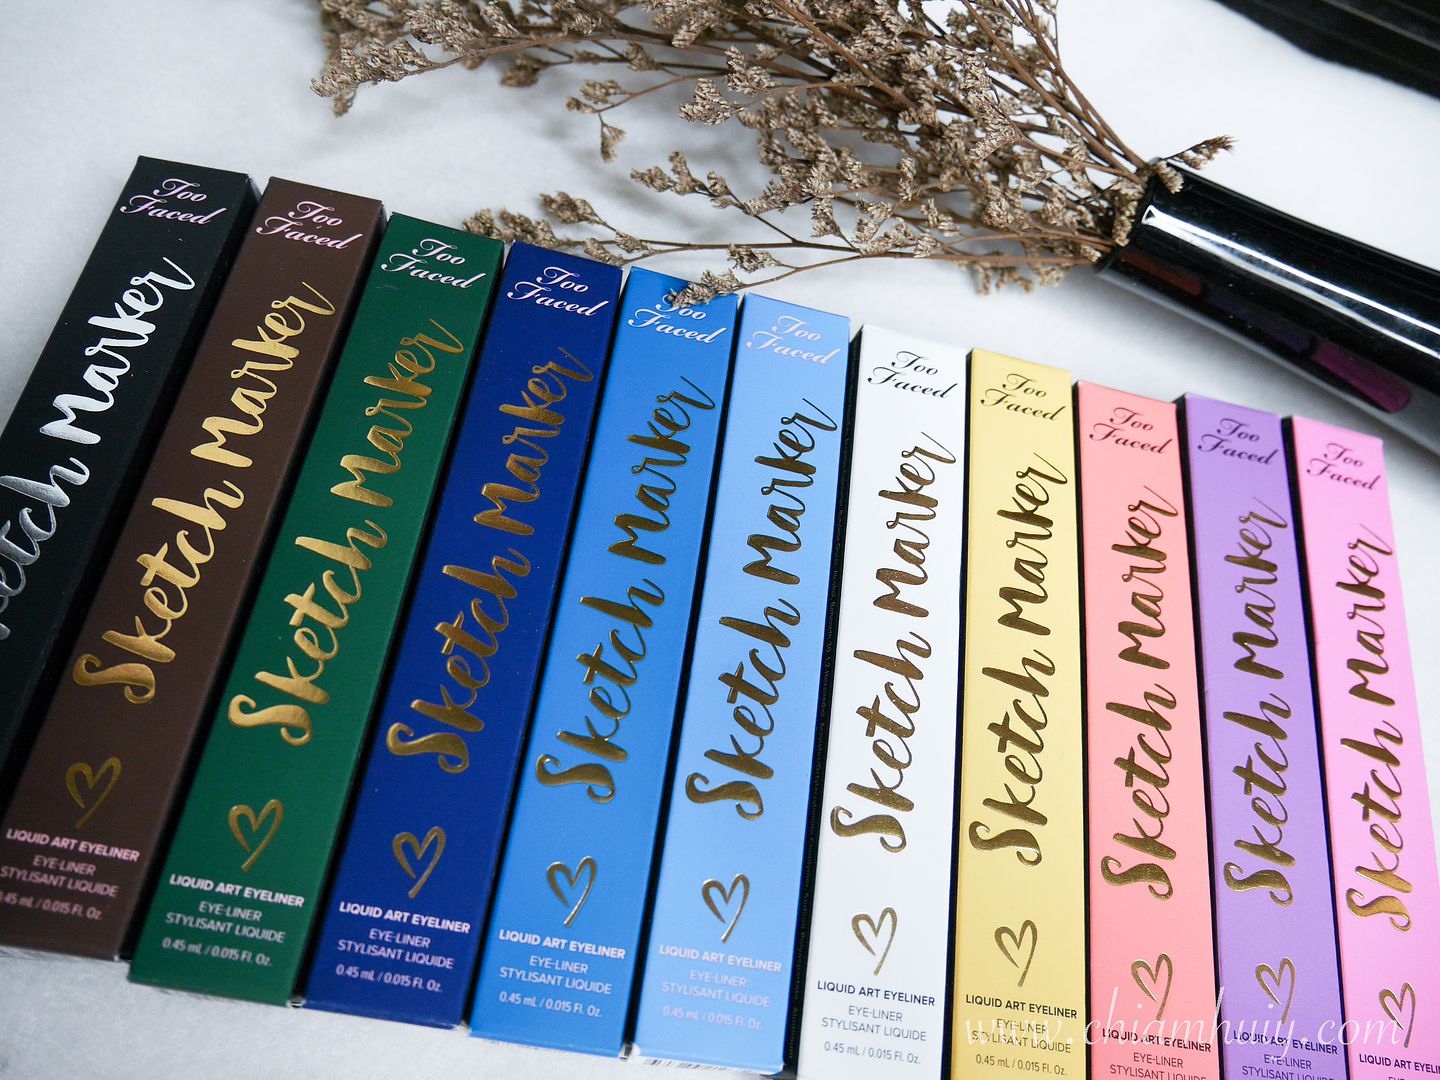  photo toofaced sketchmarkers singapore_0_zpswge7gn1w.jpg